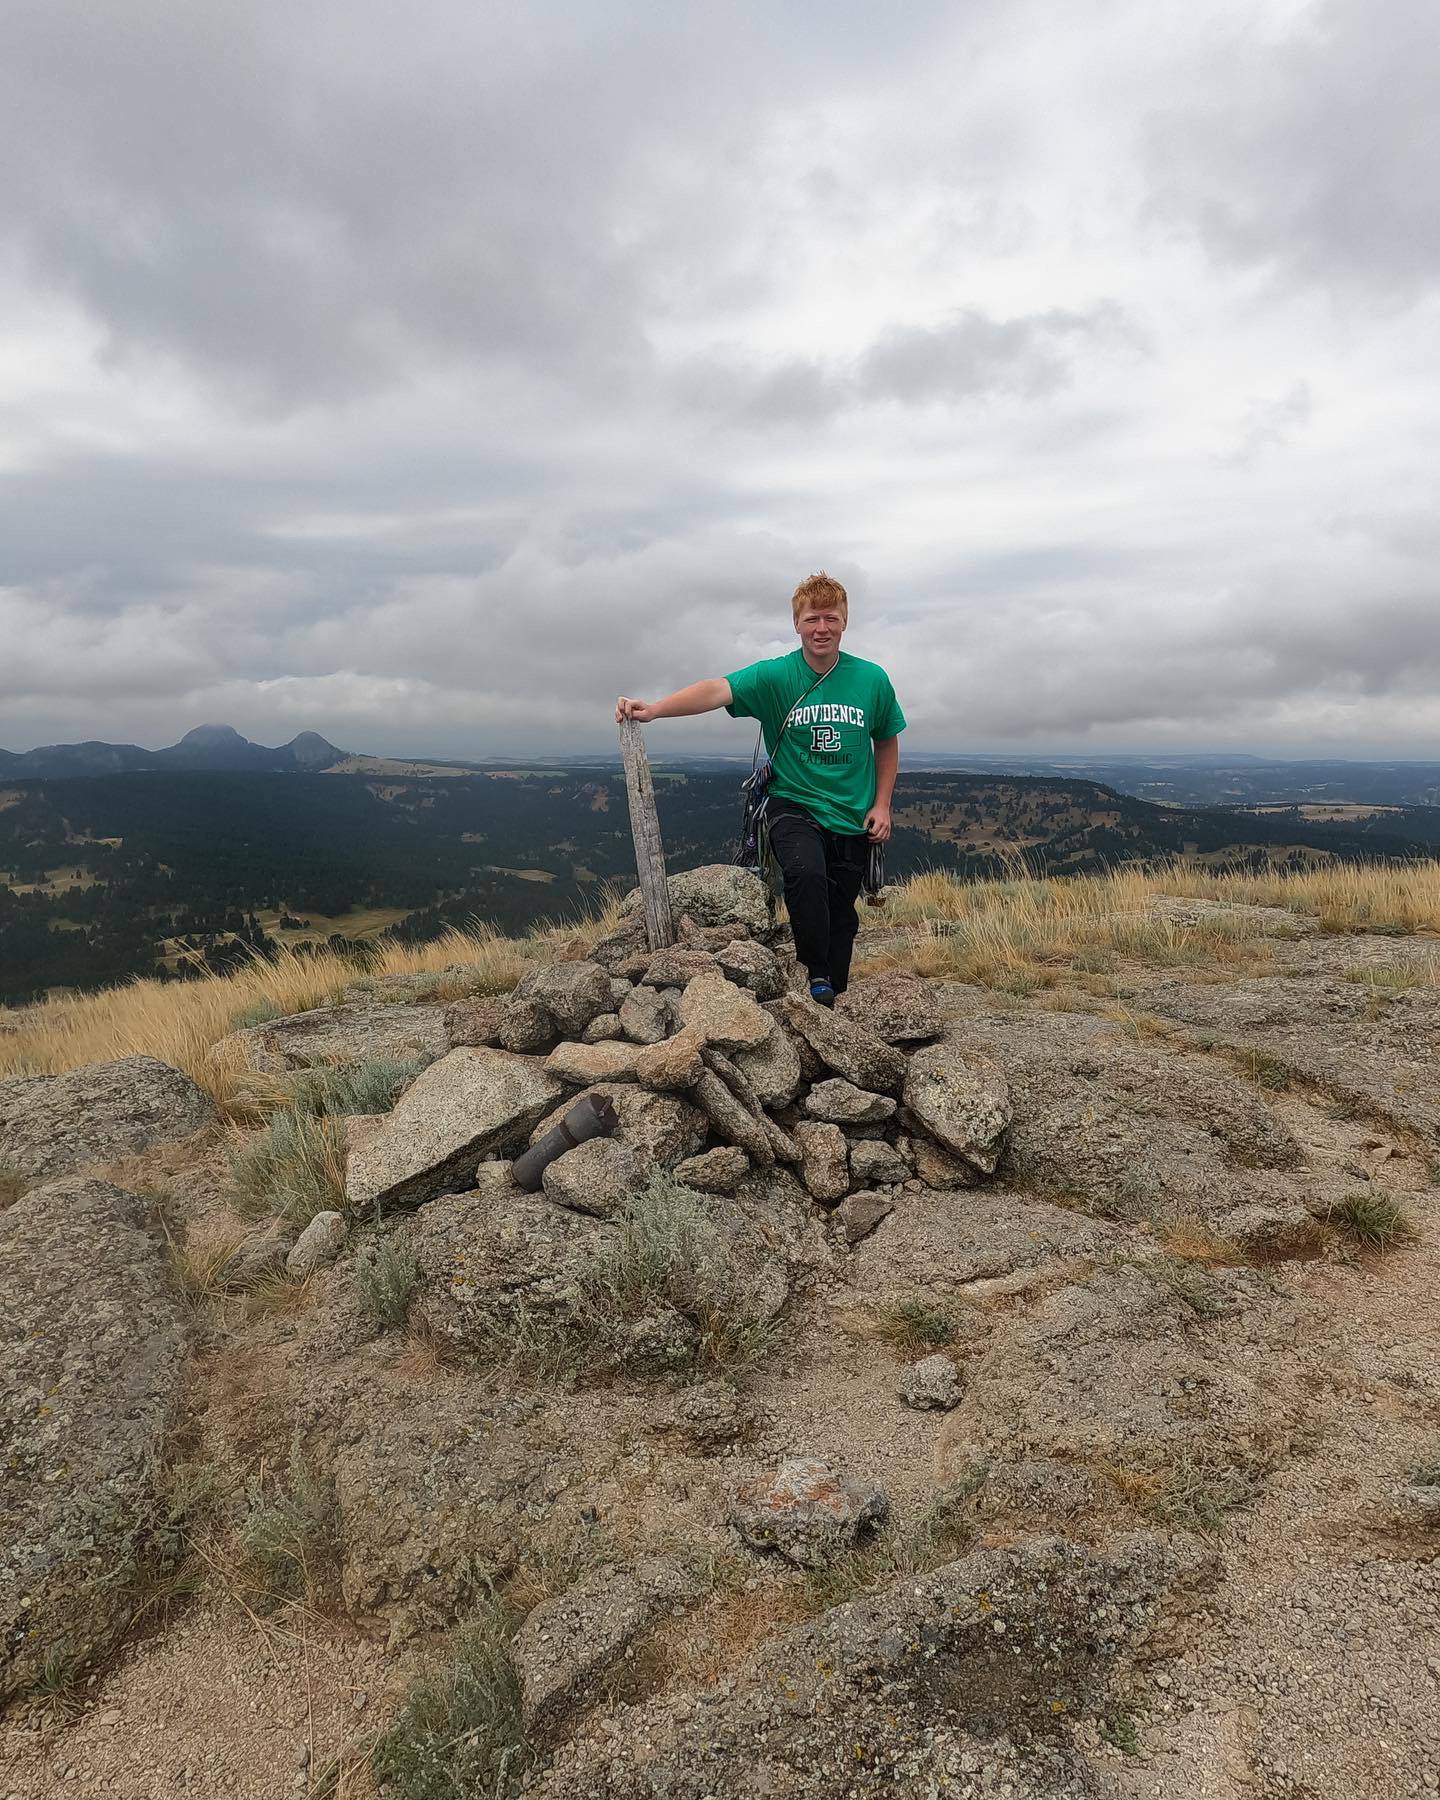 Noah Kelleher, 16, of Dwight, (front) recently climbed Devil’s Tower National Monument in Wyoming to help raise money for Providence Catholic High School's Celtic God Parent Emergency Aid Fund. Kelleher is a student at the New Lenox school.